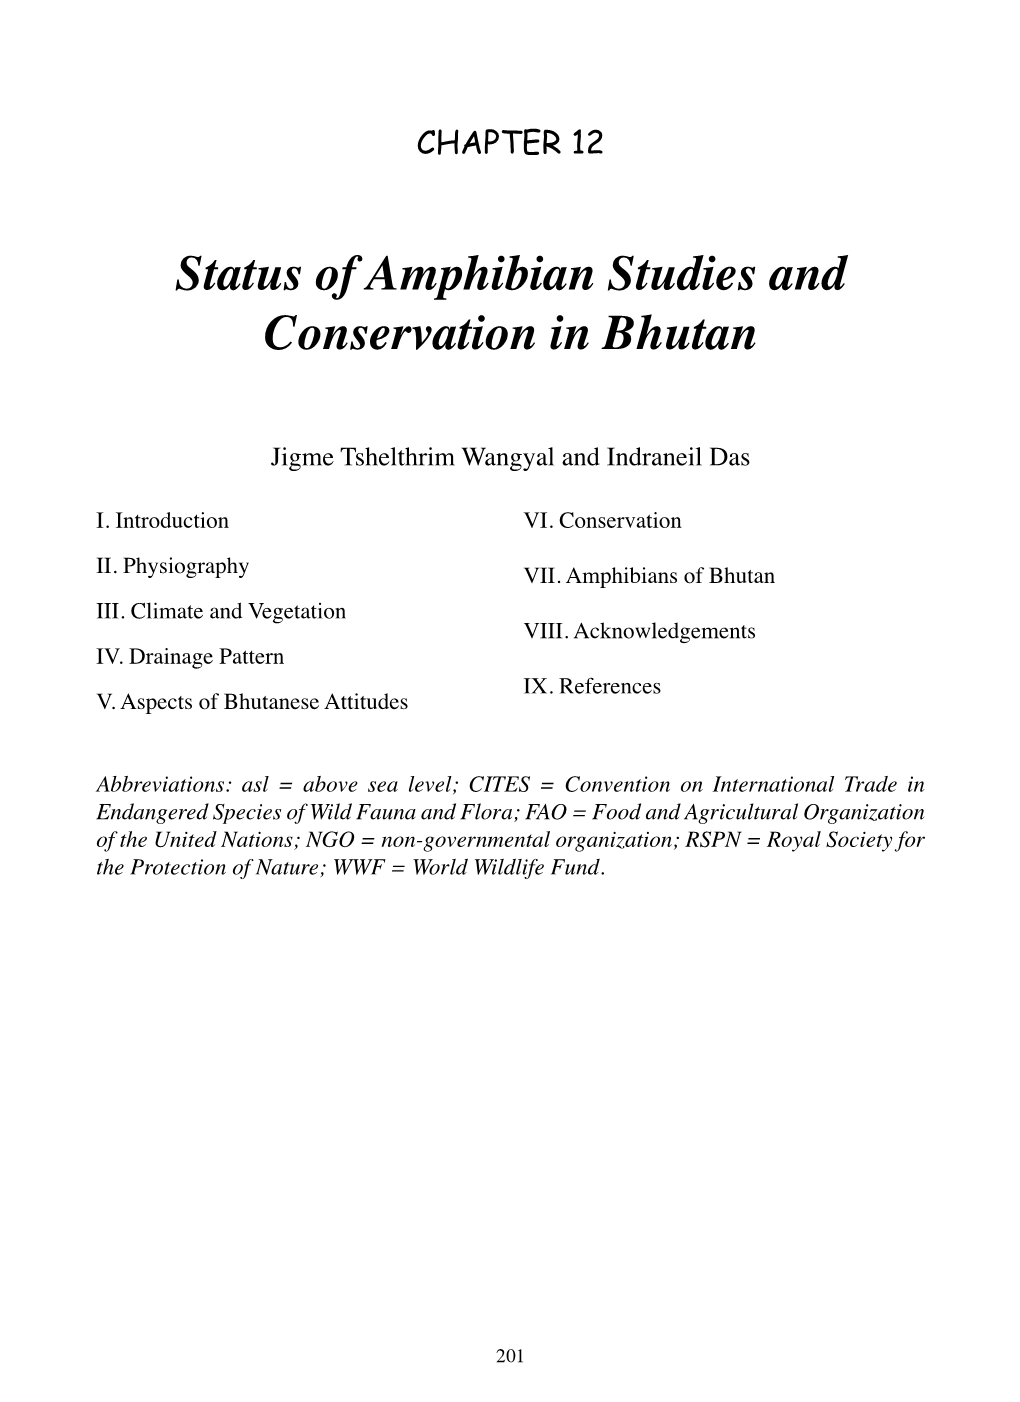 Status of Amphibian Studies and Conservation in Bhutan